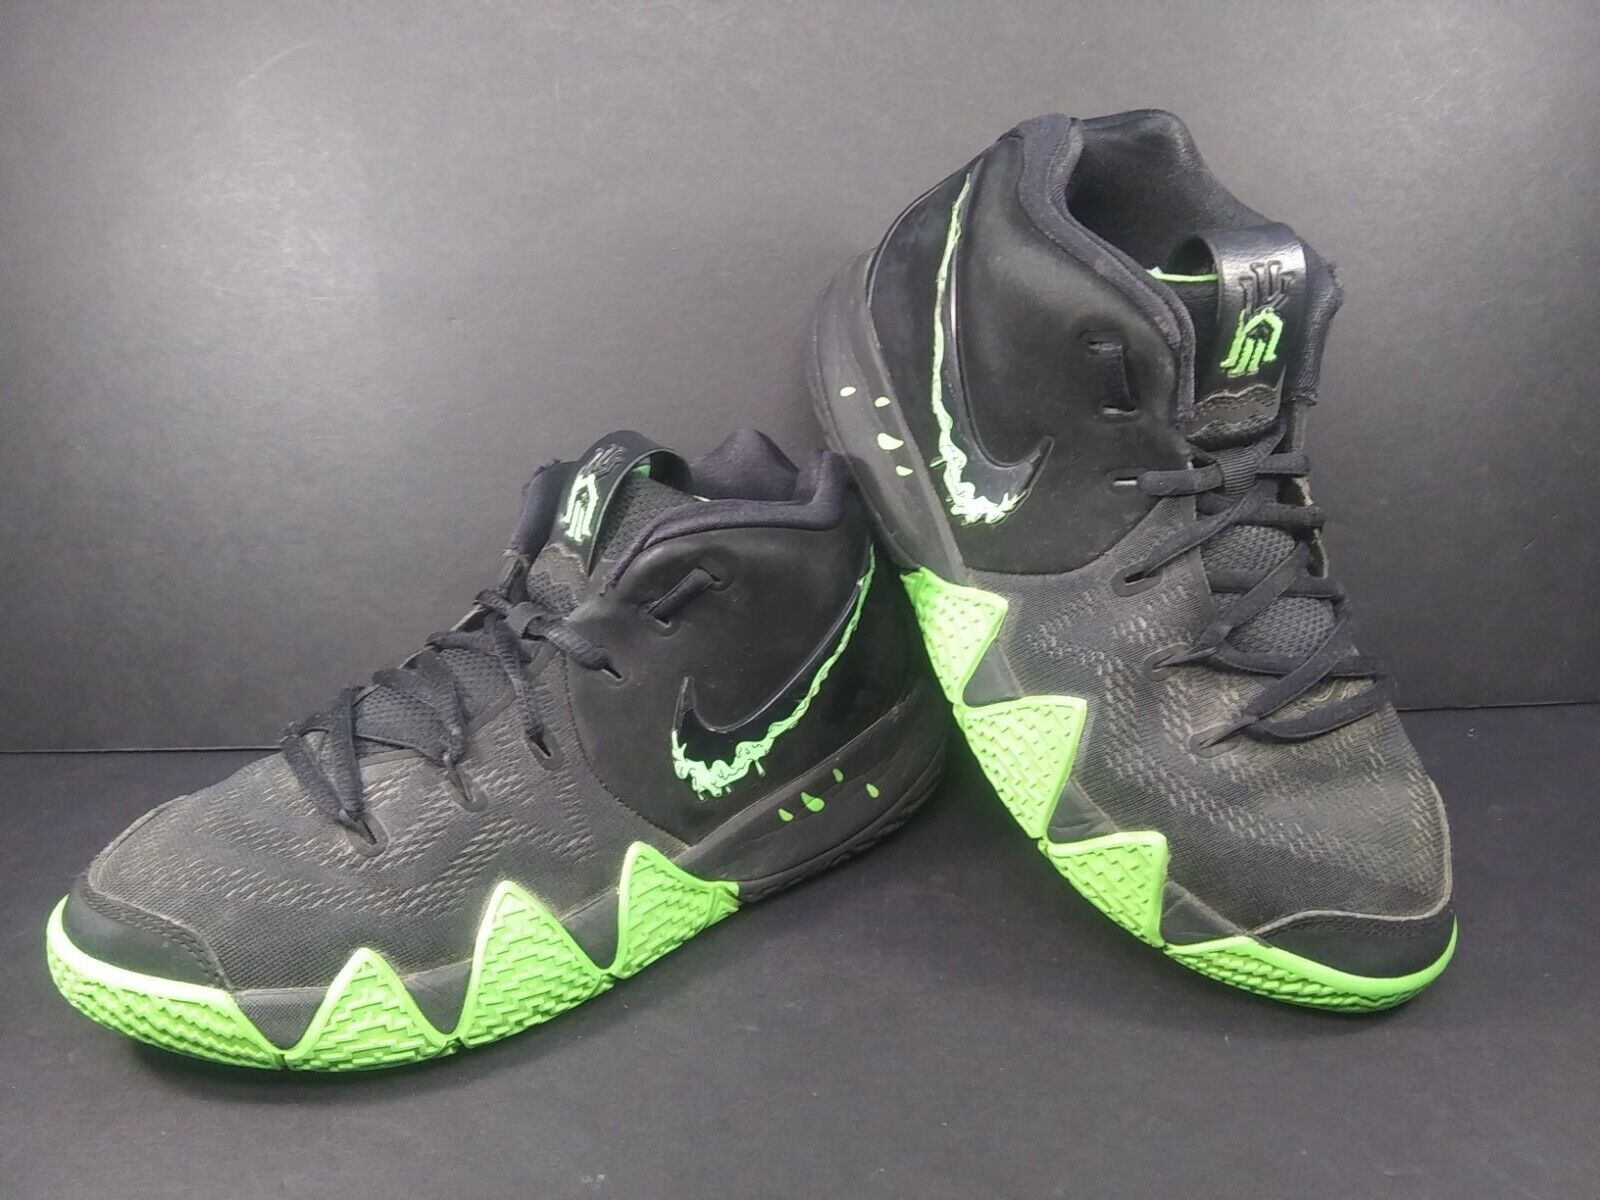 kyrie irving slime shoes